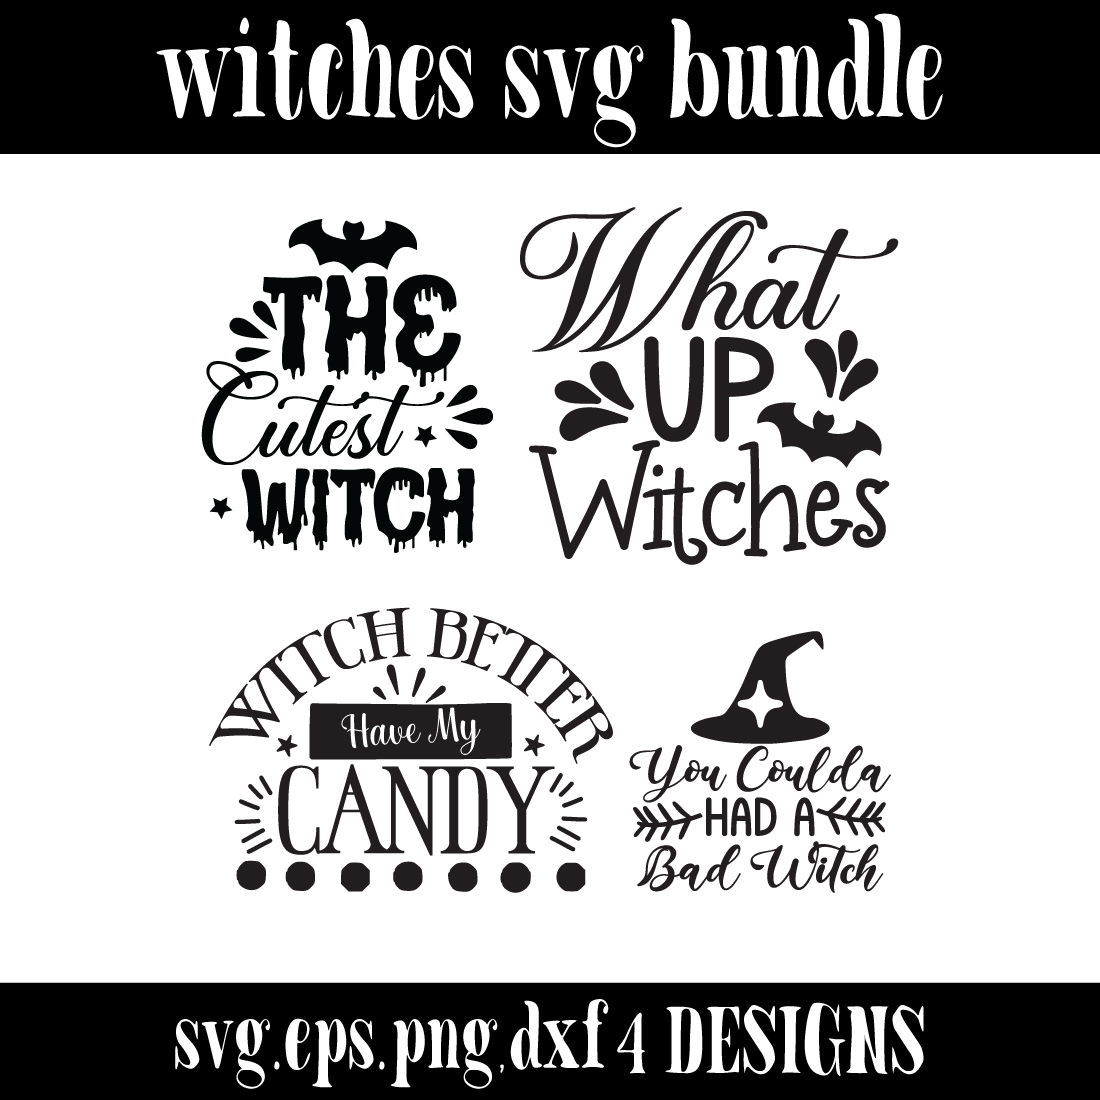 witches svg bundle preview image.